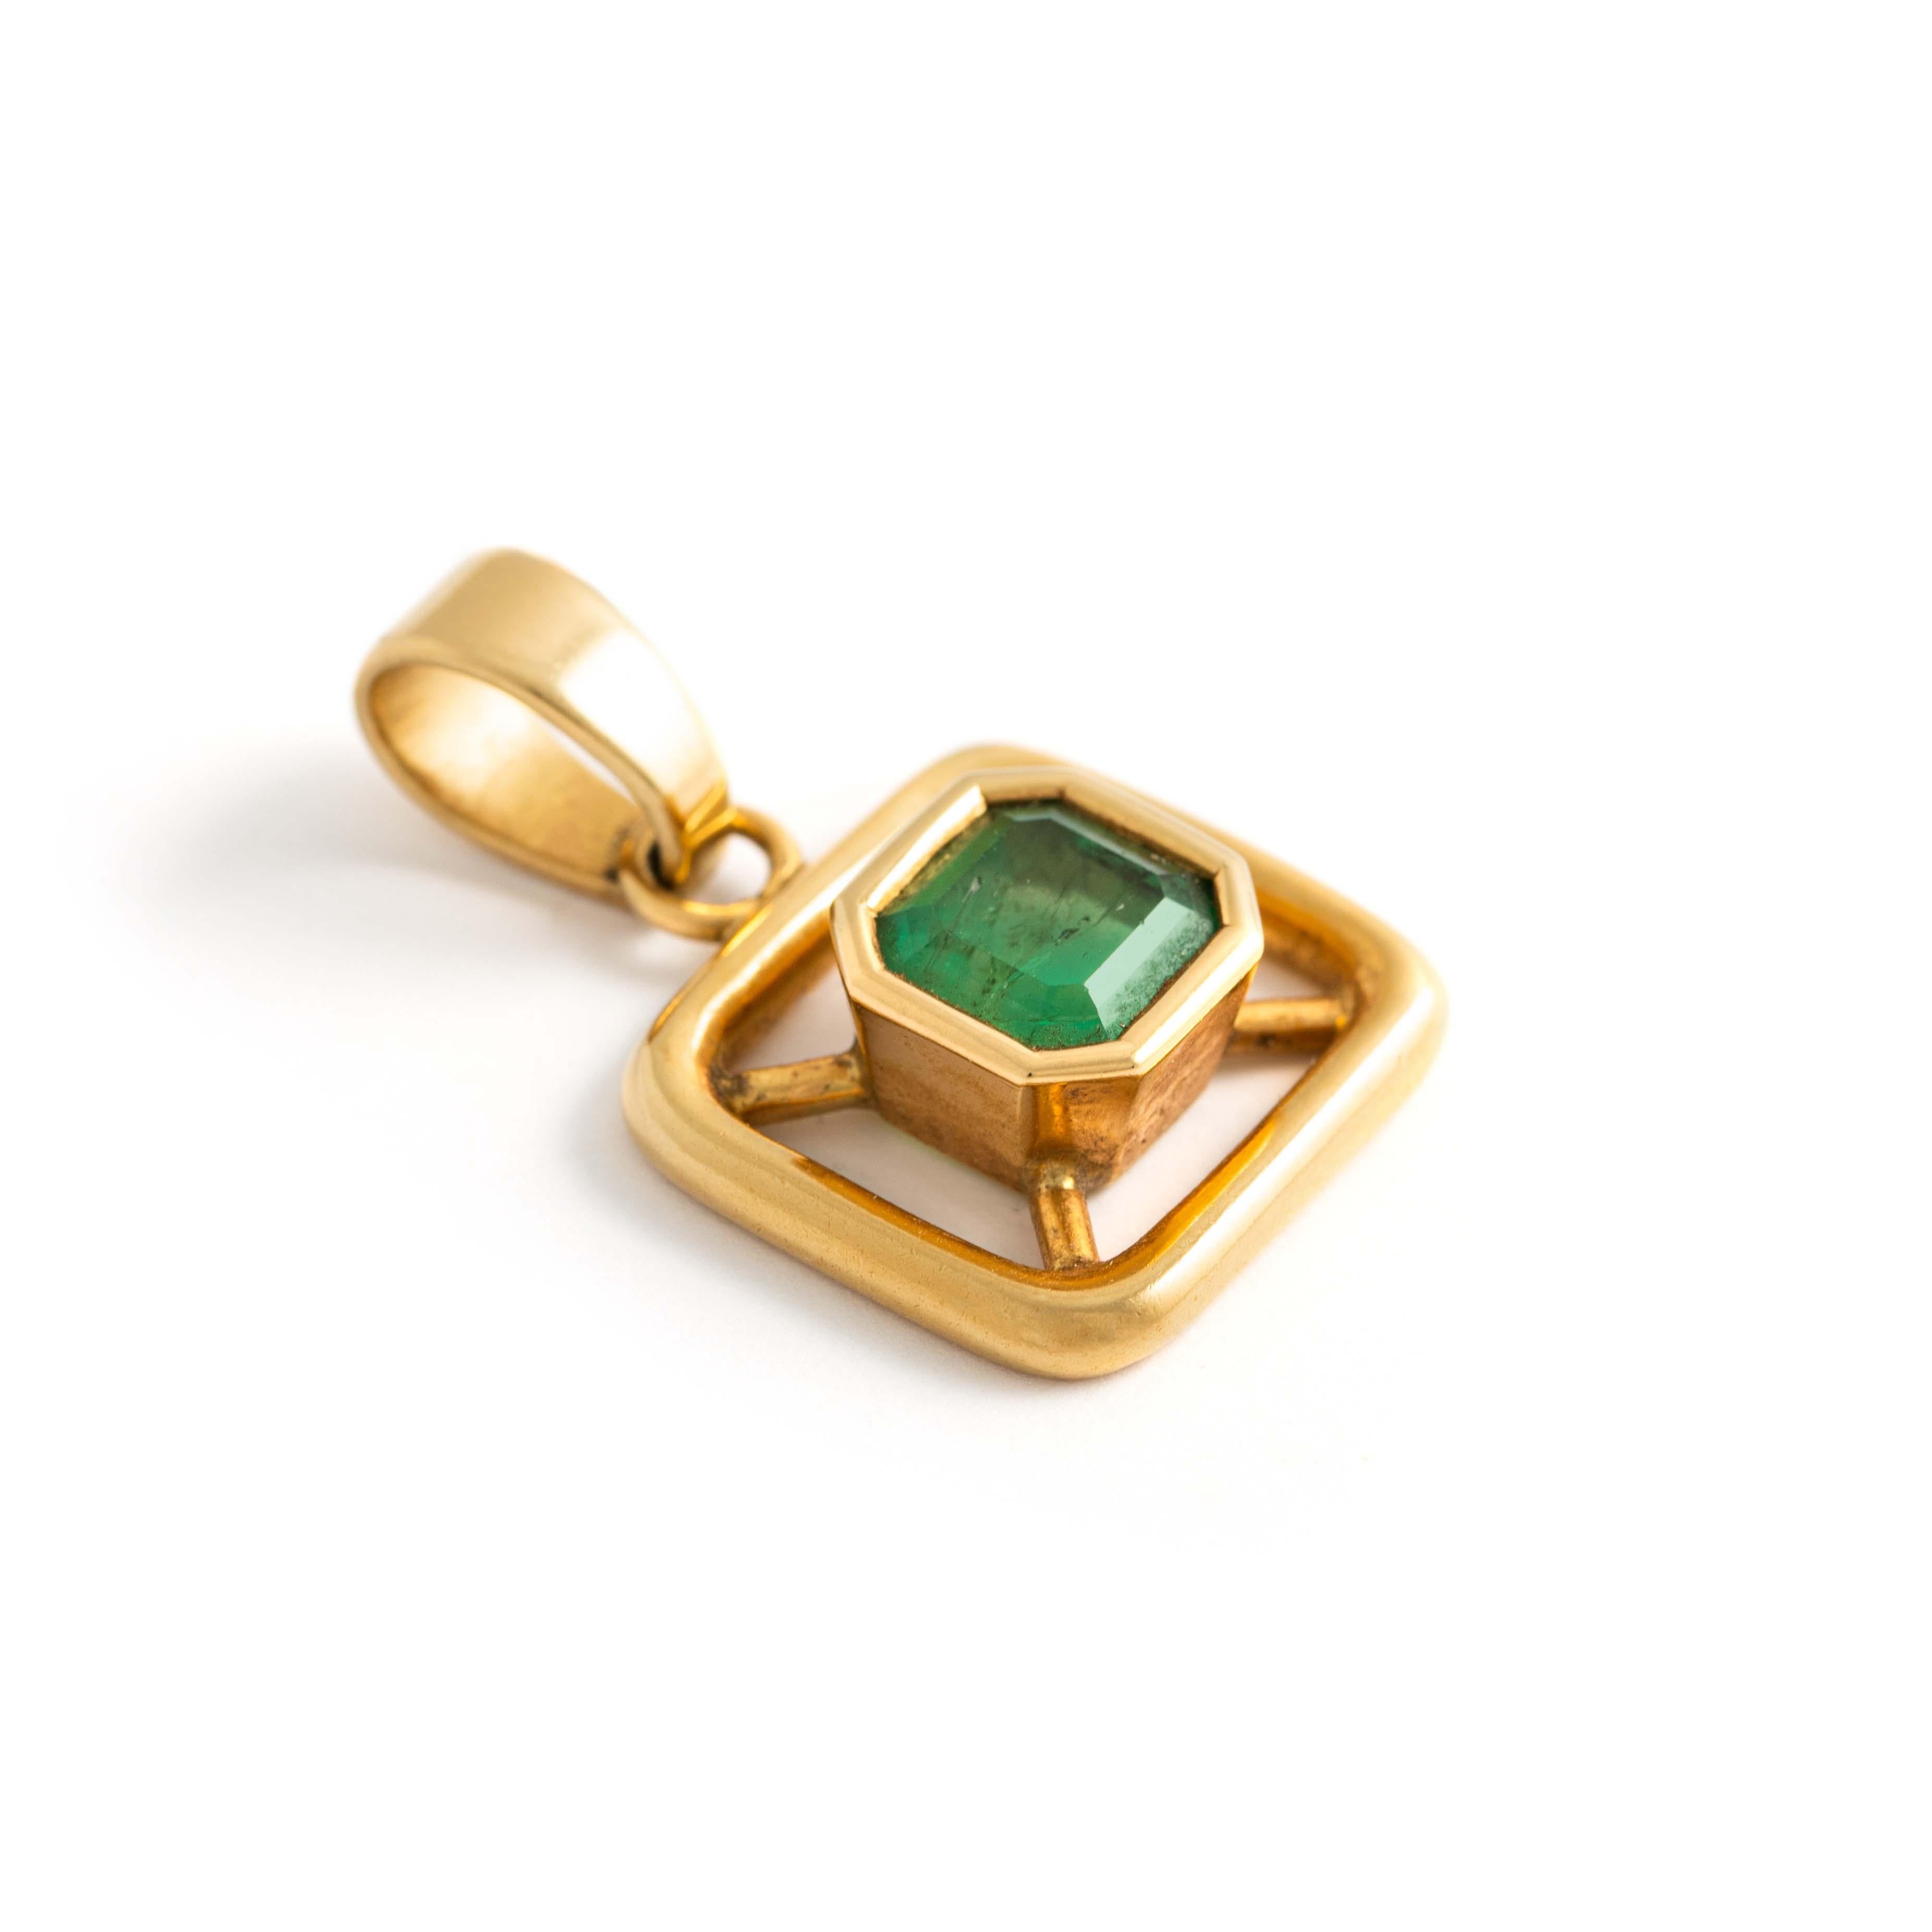 Emerald 18K Yellow Gold Pendant
Centered by a square cut emerald (untested).
Total height: 2.60 centimeters. 
Gross weight: 8.17 grams.